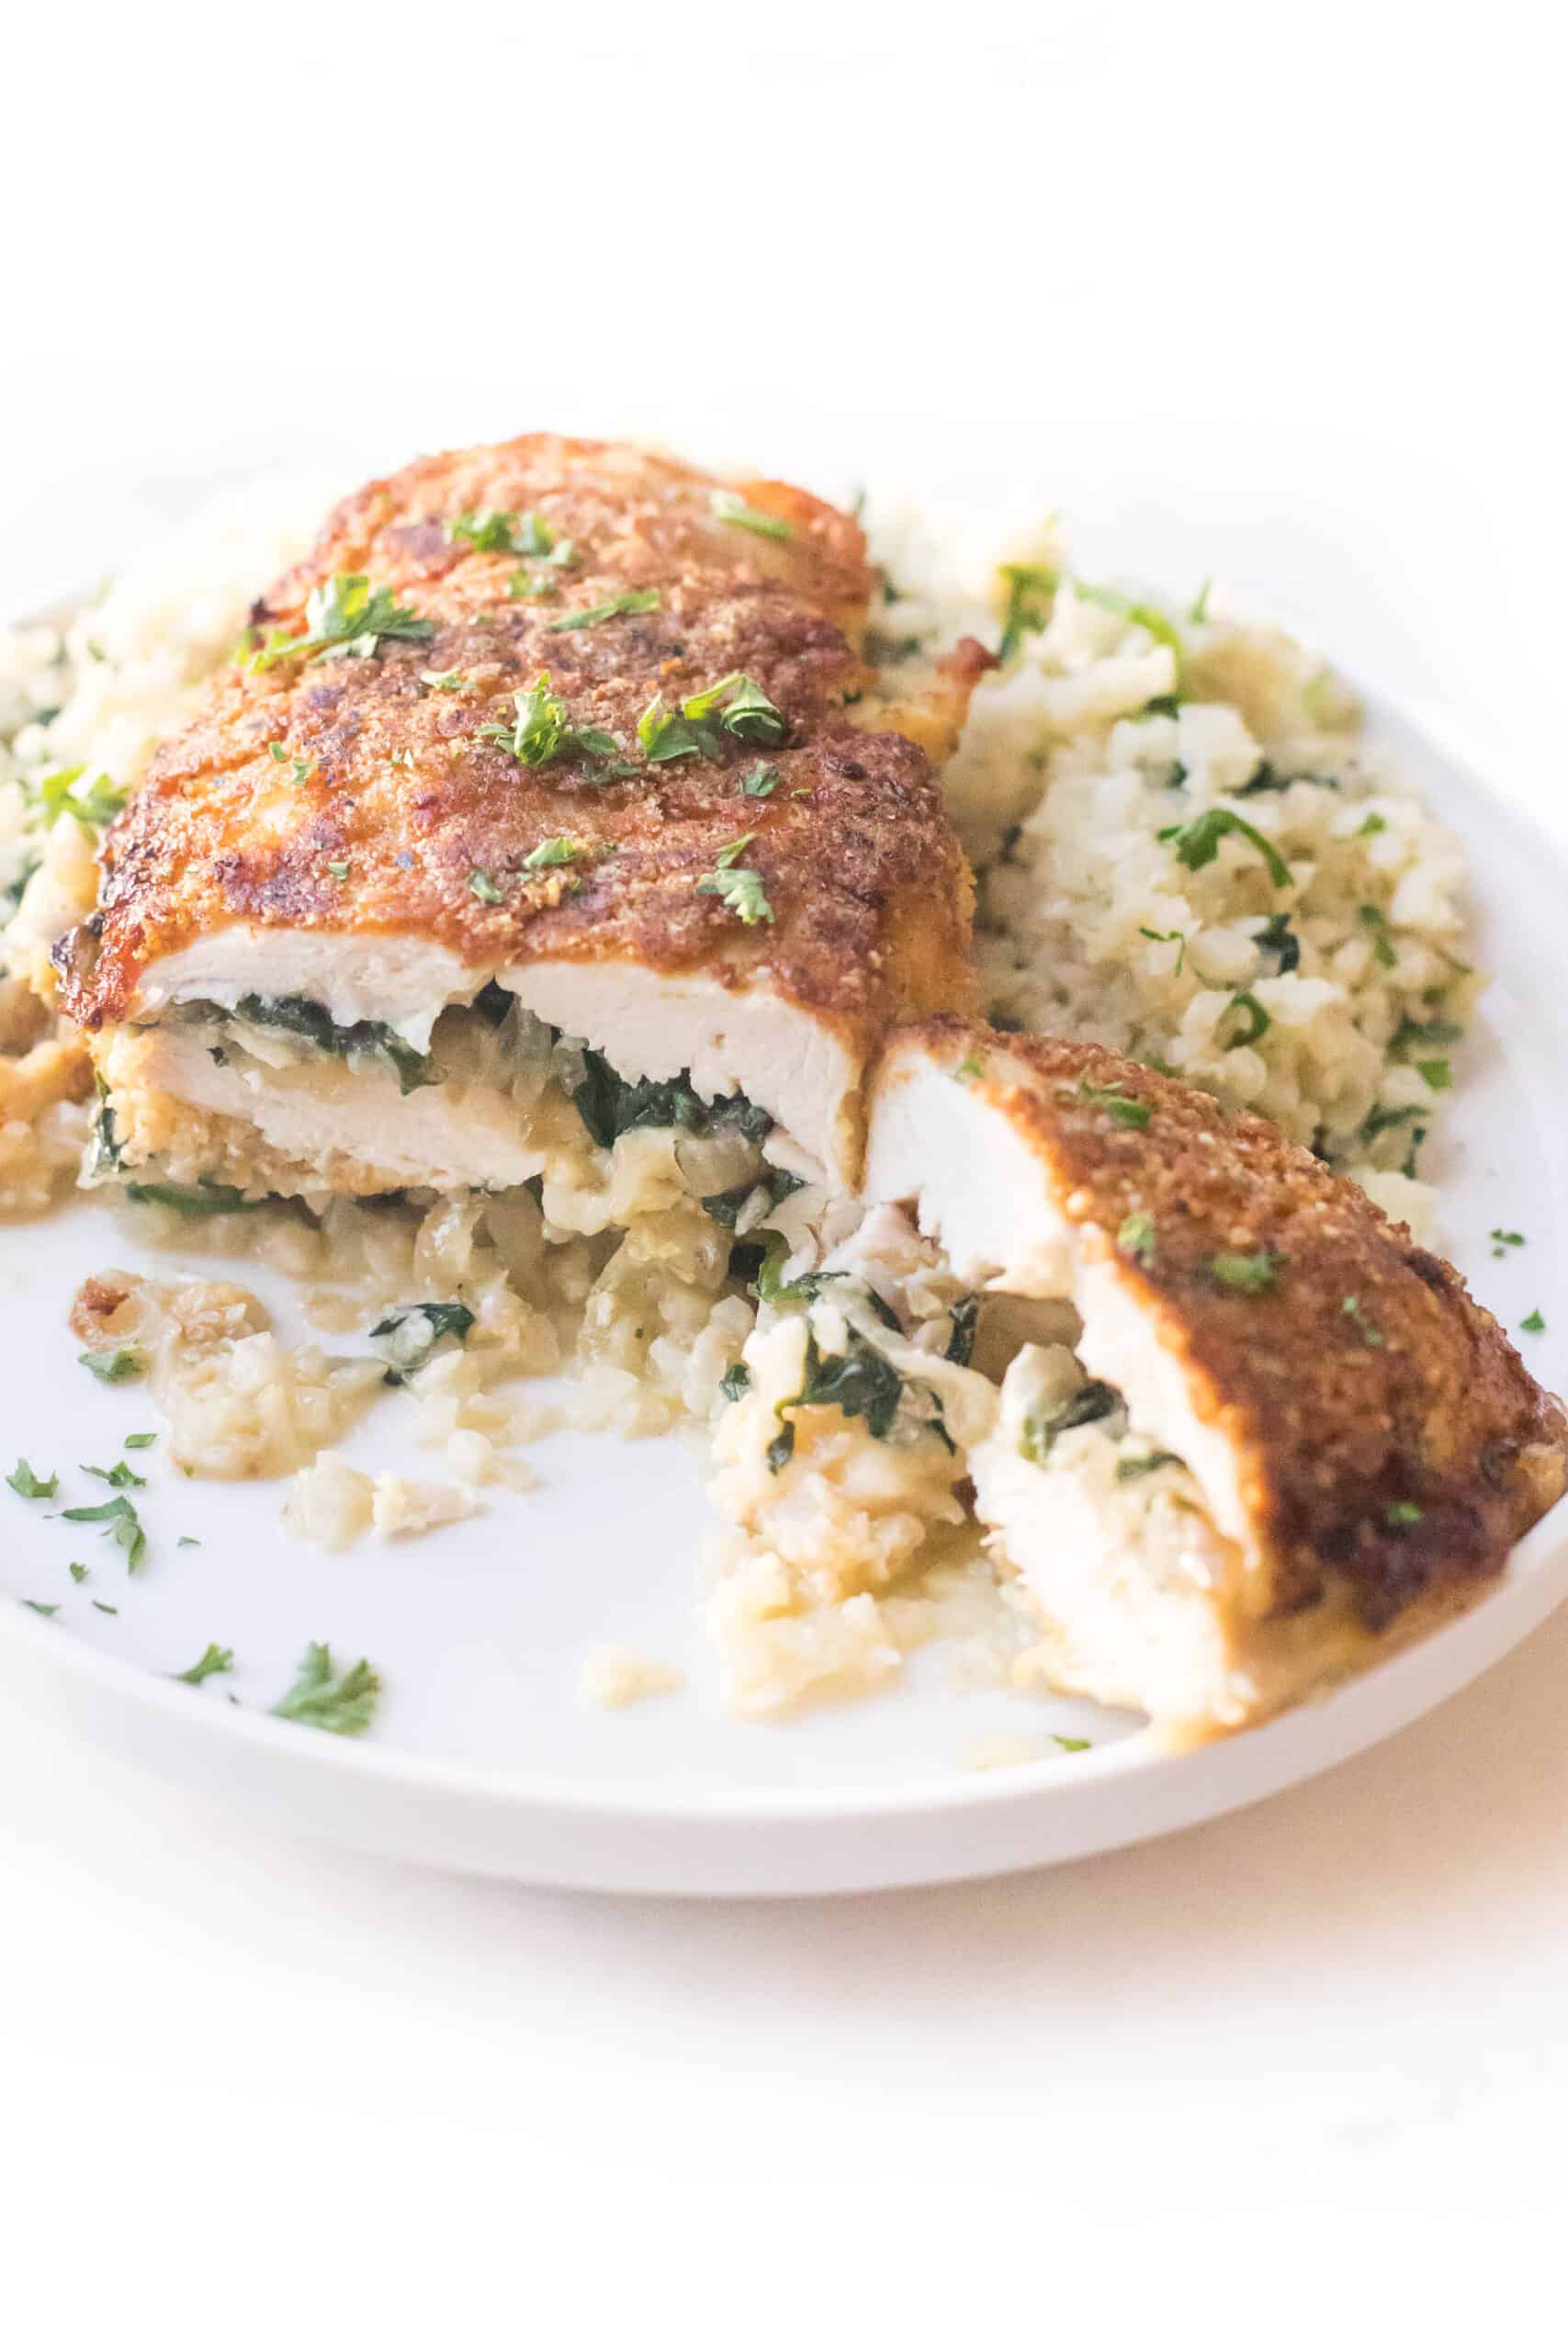 keto brie + spinach stuffed chicken breast cut in half on a white plate with cauliflower rice